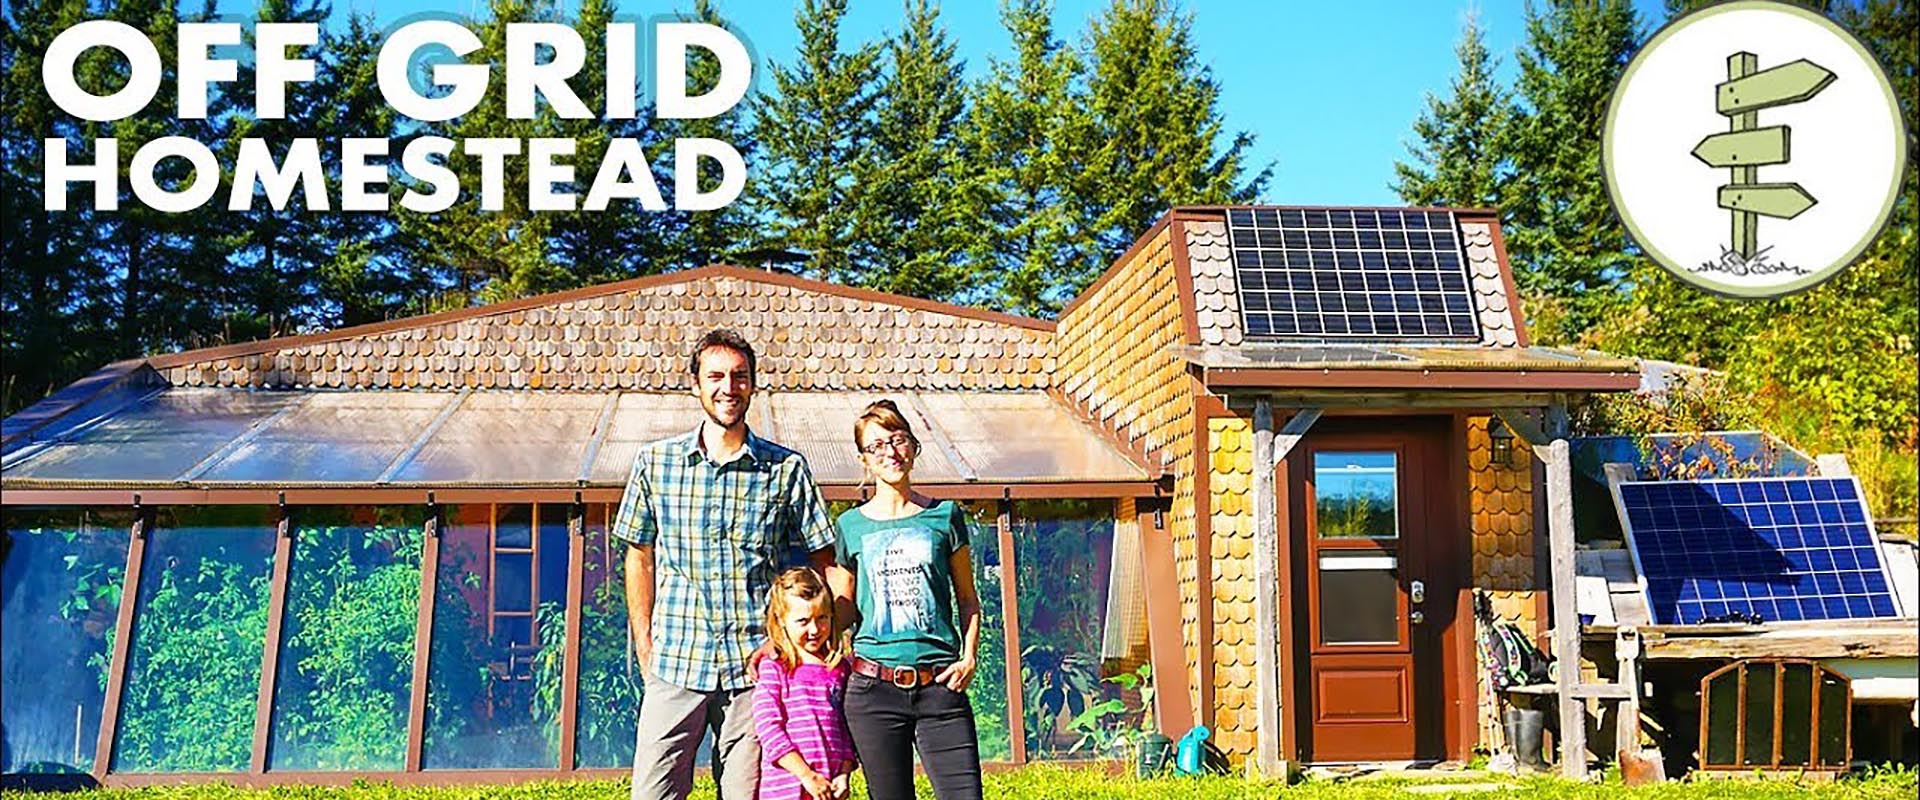 How to Start Living Off the Grid?